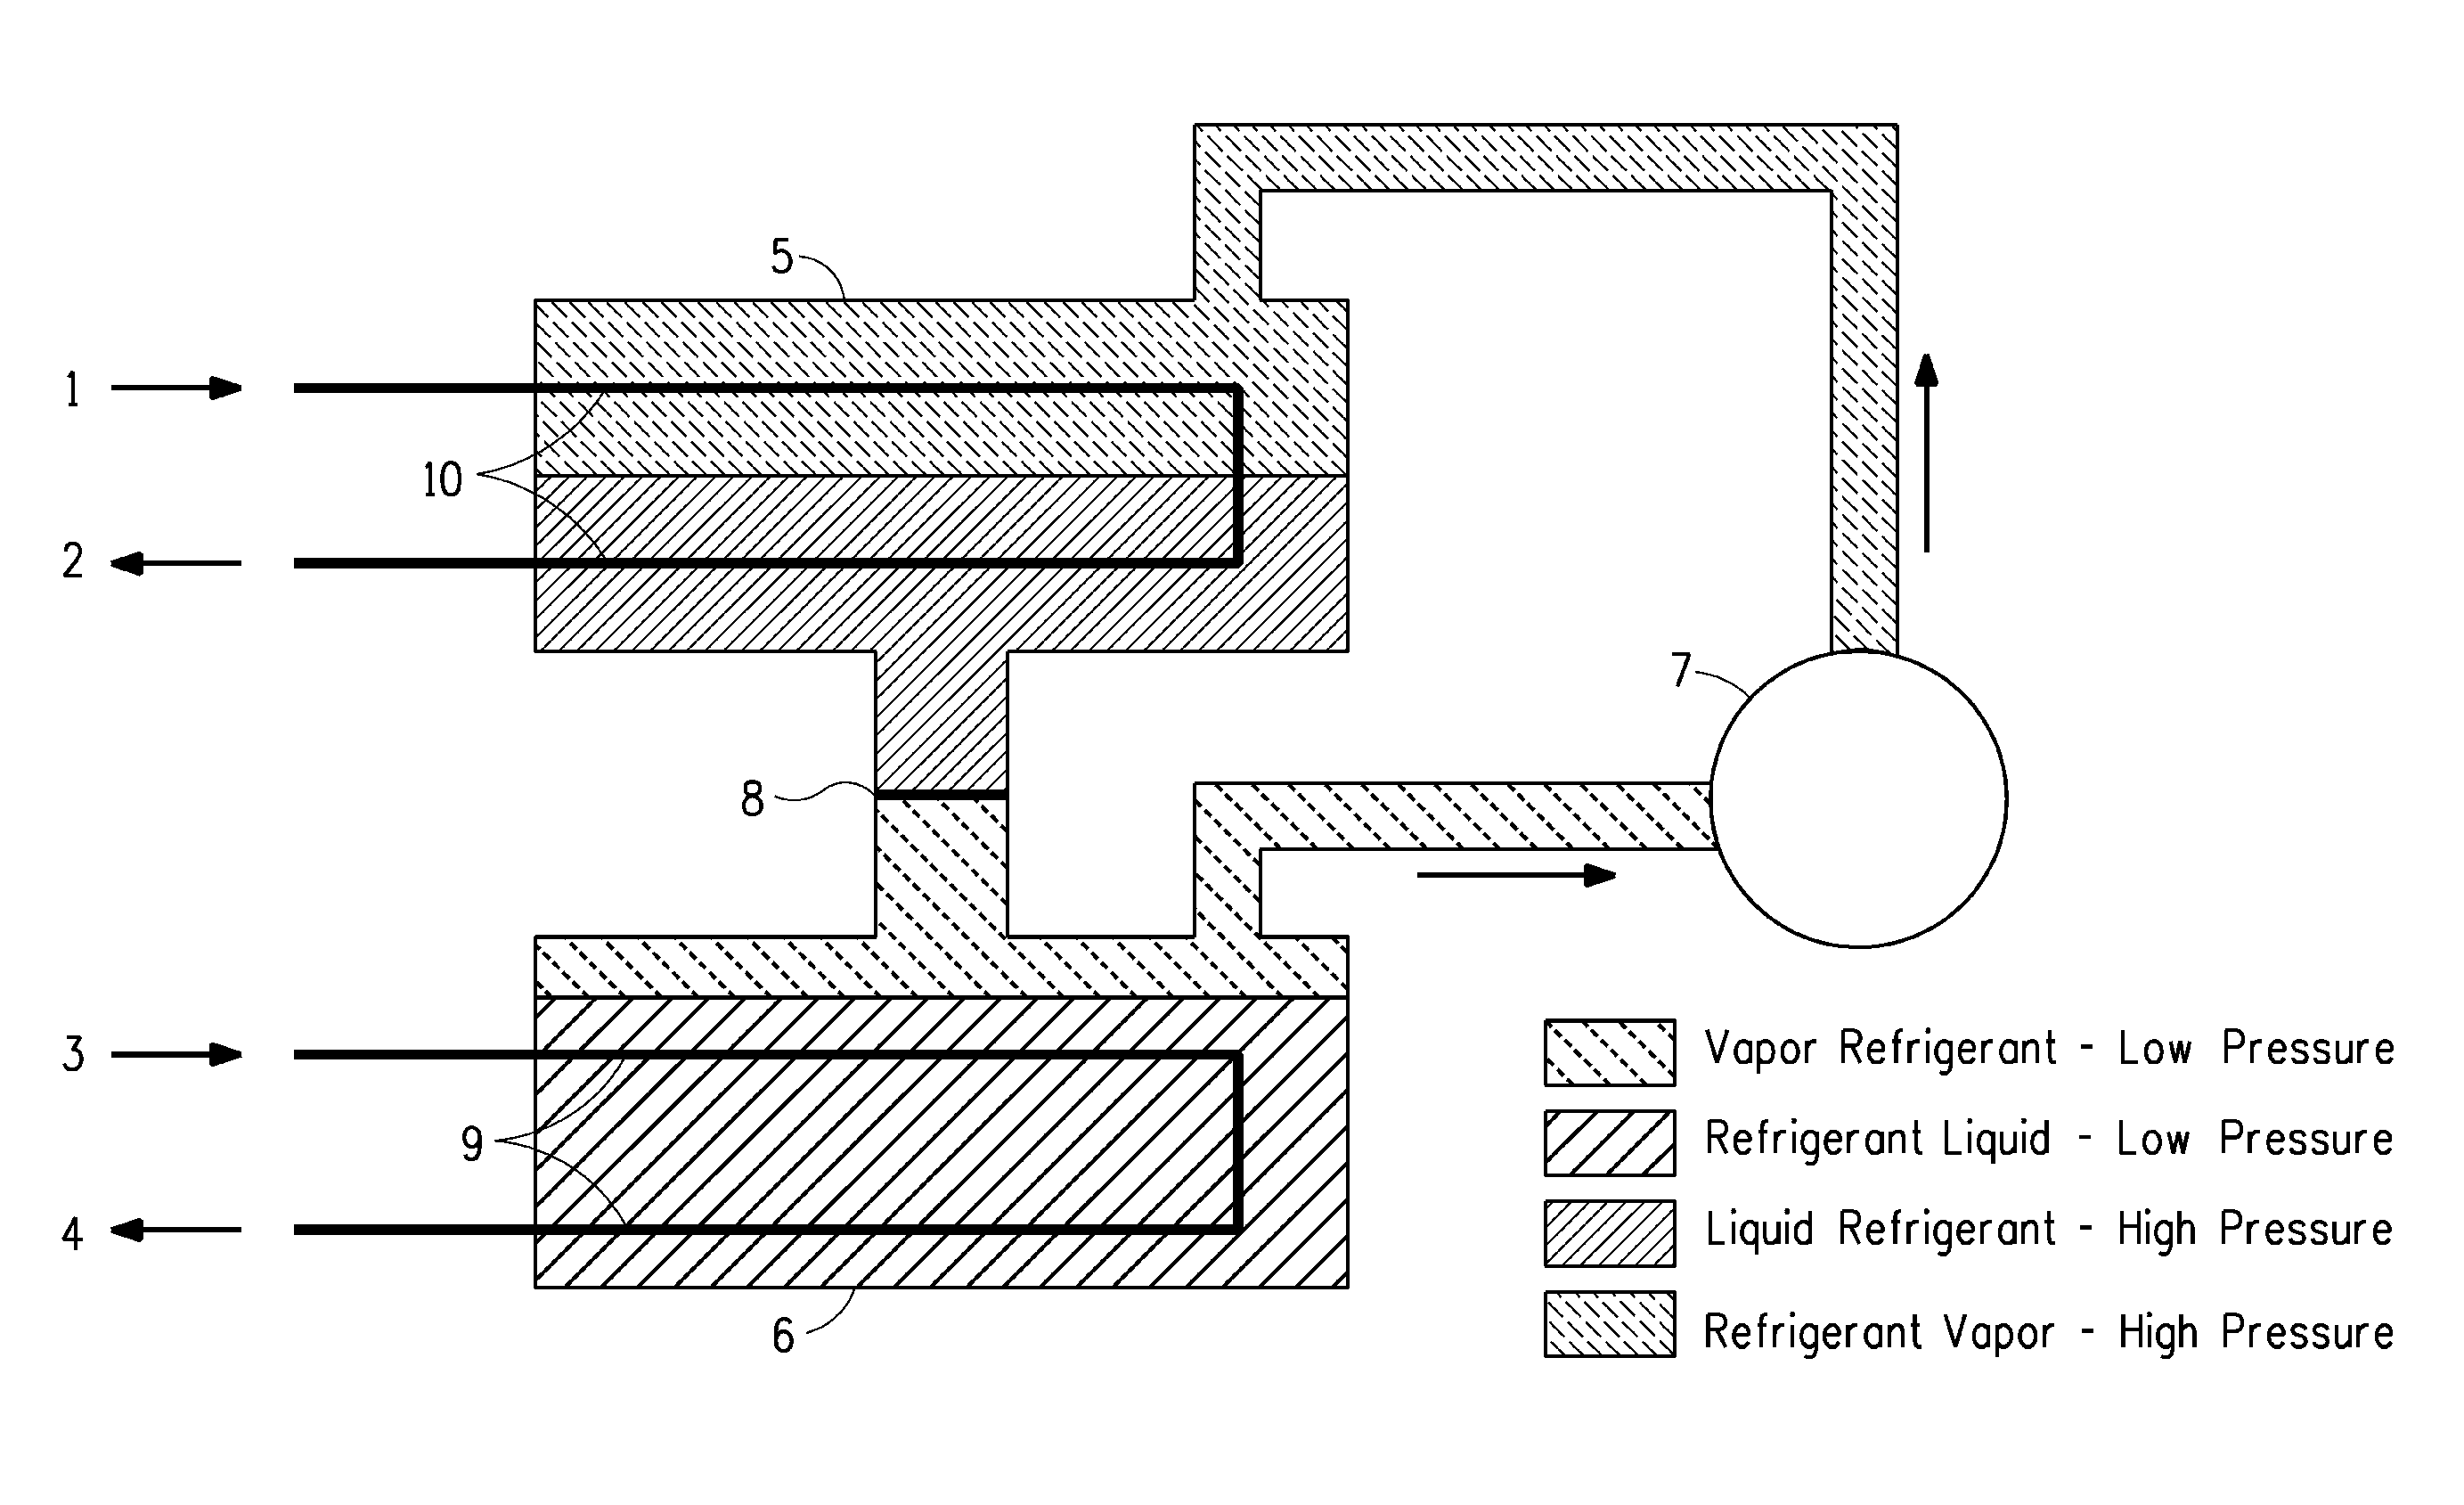 Chiller apparatus containing trans-1,1,1,4,4,4-hexafluoro-2-butene and methods of producing cooling therein